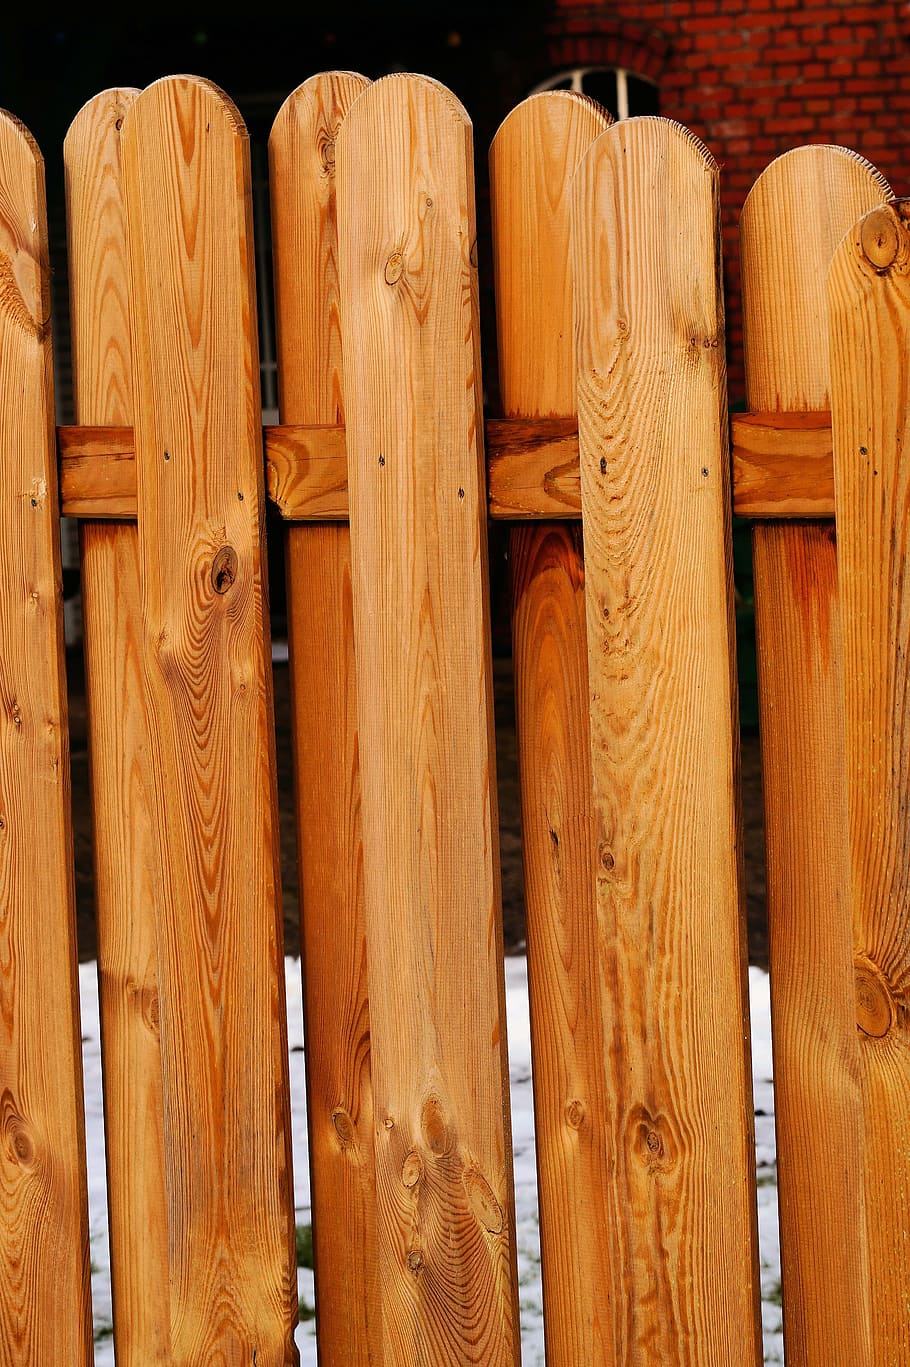 fence, wood fence, limit, paling, demarcation, battens, garden fence, boards, protection, palisade